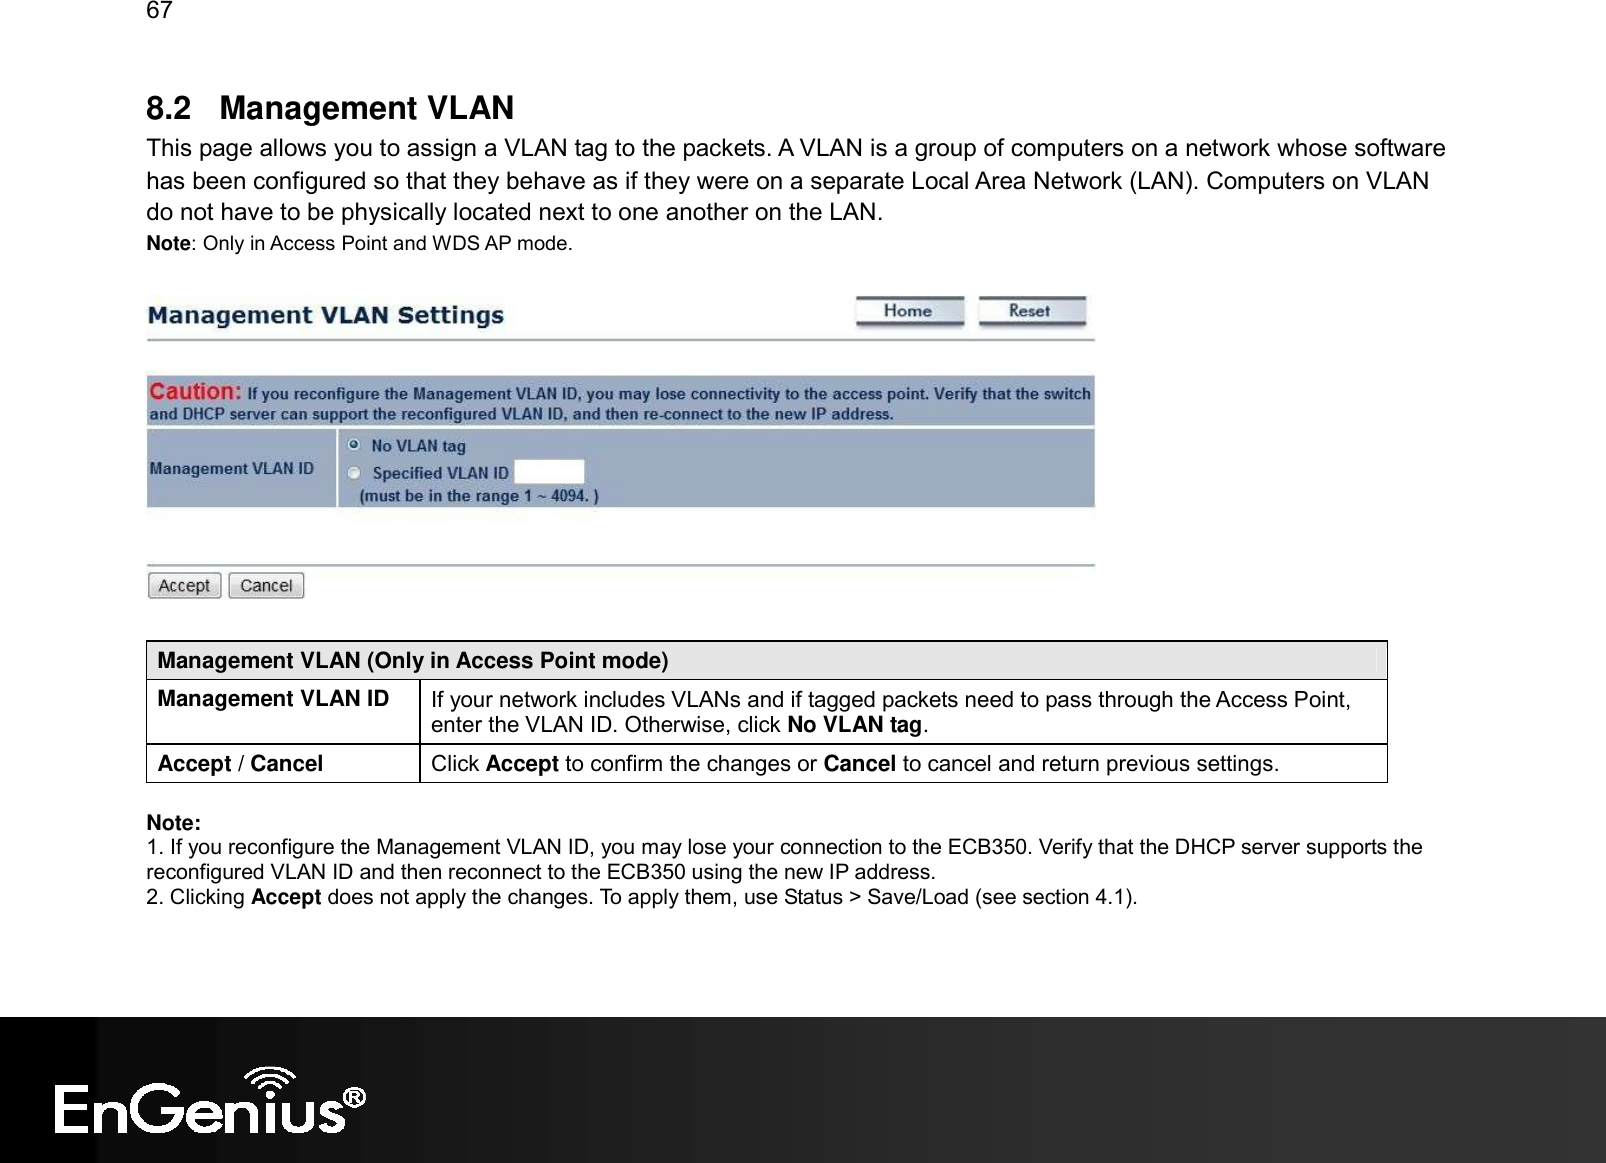 67  8.2  Management VLAN This page allows you to assign a VLAN tag to the packets. A VLAN is a group of computers on a network whose software has been configured so that they behave as if they were on a separate Local Area Network (LAN). Computers on VLAN do not have to be physically located next to one another on the LAN. Note: Only in Access Point and WDS AP mode.    Management VLAN (Only in Access Point mode) Management VLAN ID  If your network includes VLANs and if tagged packets need to pass through the Access Point, enter the VLAN ID. Otherwise, click No VLAN tag. Accept / Cancel  Click Accept to confirm the changes or Cancel to cancel and return previous settings.  Note:  1. If you reconfigure the Management VLAN ID, you may lose your connection to the ECB350. Verify that the DHCP server supports the reconfigured VLAN ID and then reconnect to the ECB350 using the new IP address.  2. Clicking Accept does not apply the changes. To apply them, use Status &gt; Save/Load (see section 4.1).  